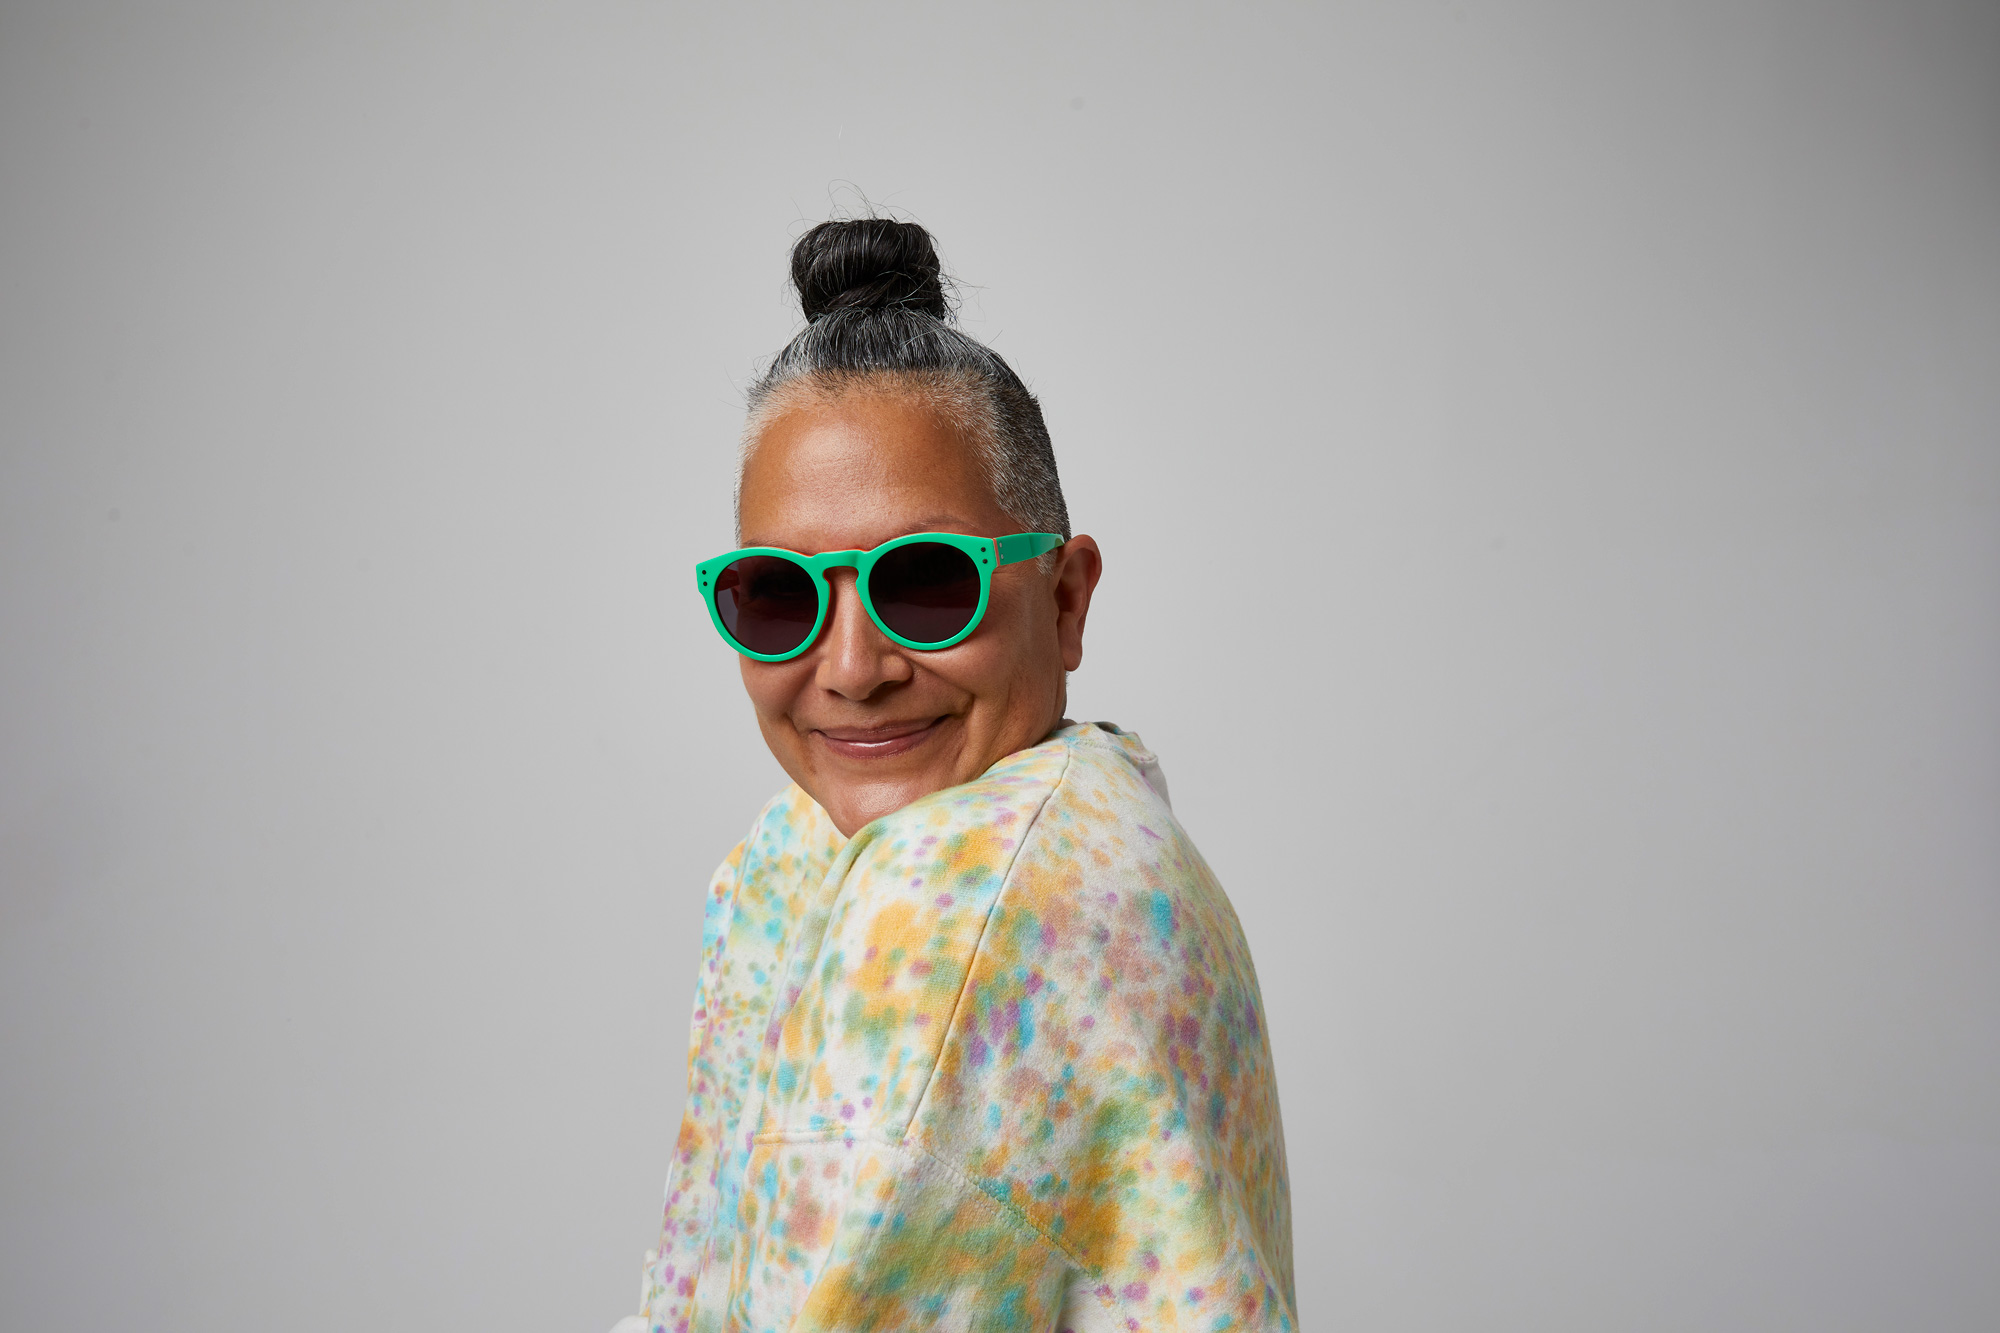 Horizontal portrait of a gray-haired woman wearing her hair in a high bun on the top of her head. The woman's body is facing the side and she is turning her head to look at the camera with a wide smile. She is wearing a multi-colored floral pastel blouse and a pair of bright jade green sunglasses with dark round, gray tinted lenses. The background of the image is light gray.